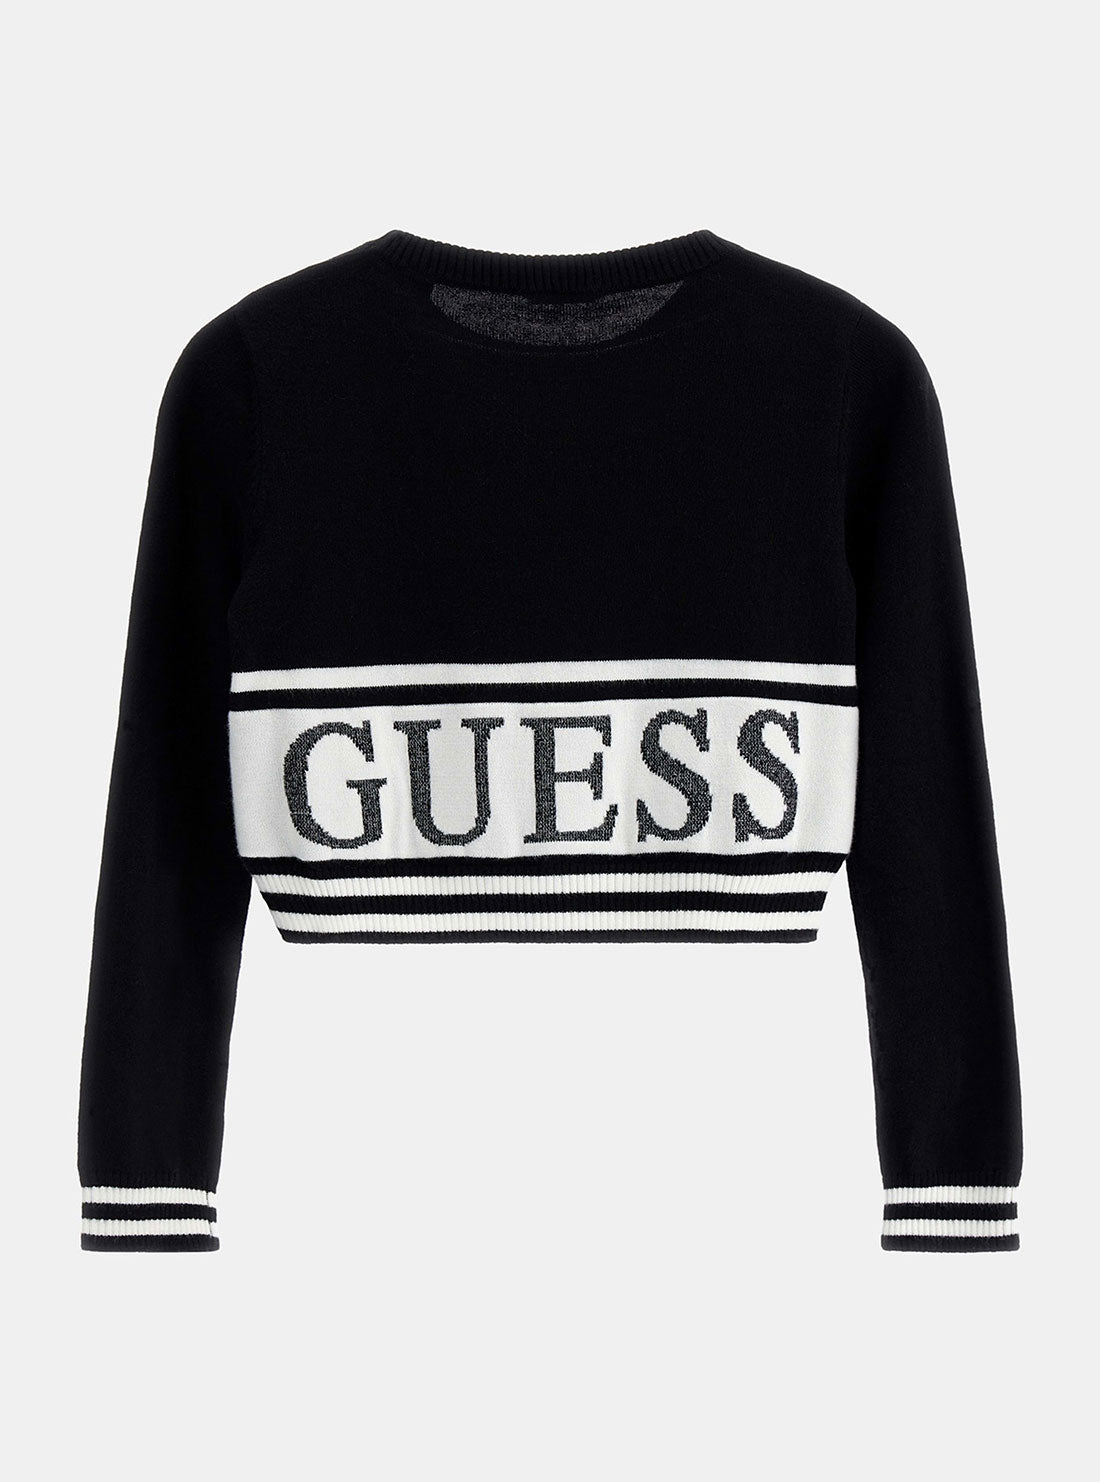 GUESS Black Long Sleeve Sweater (7-16) back view